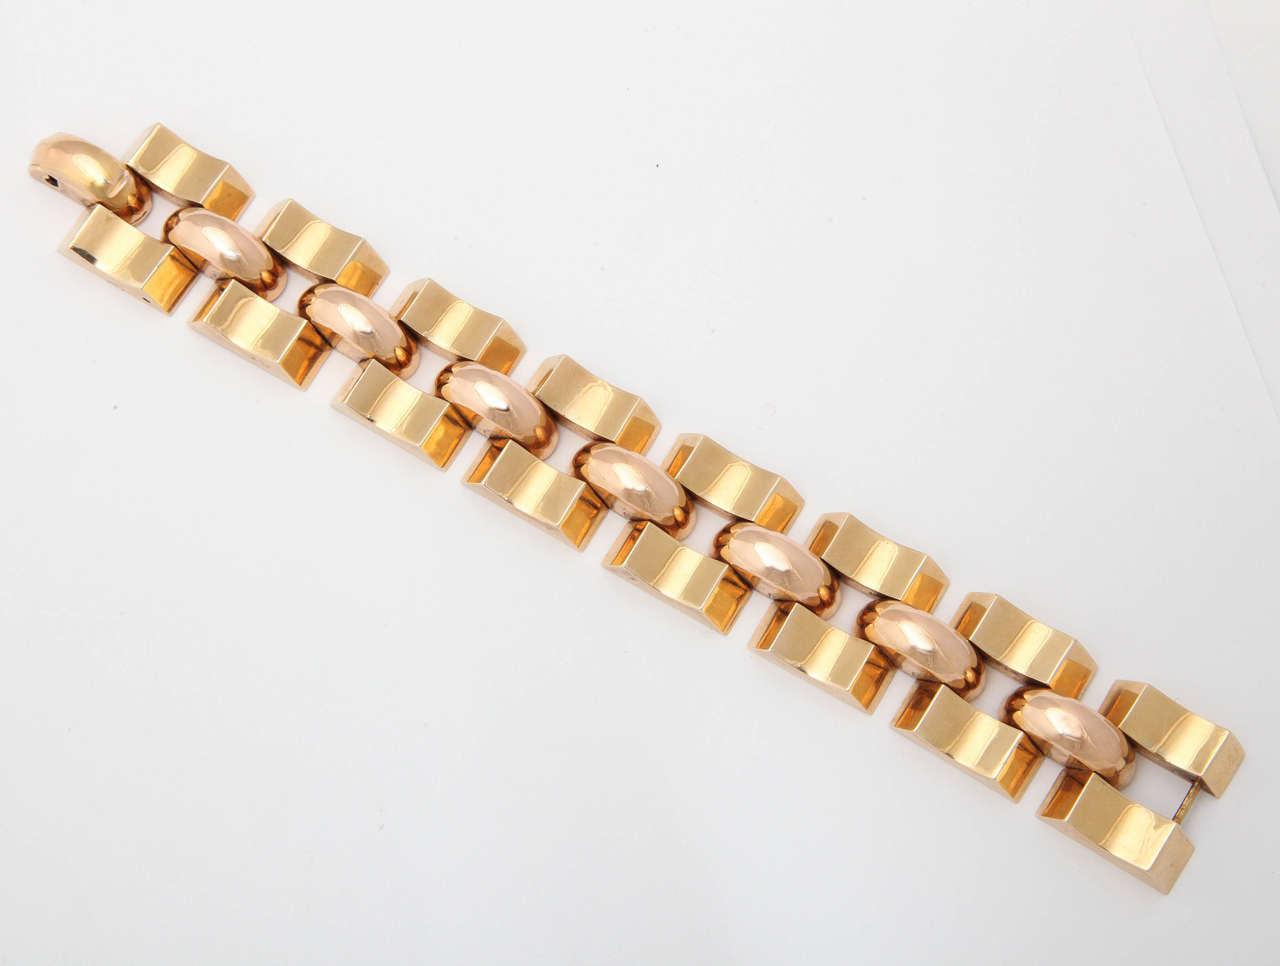 The center links are pink gold, the outer links yellow gold.